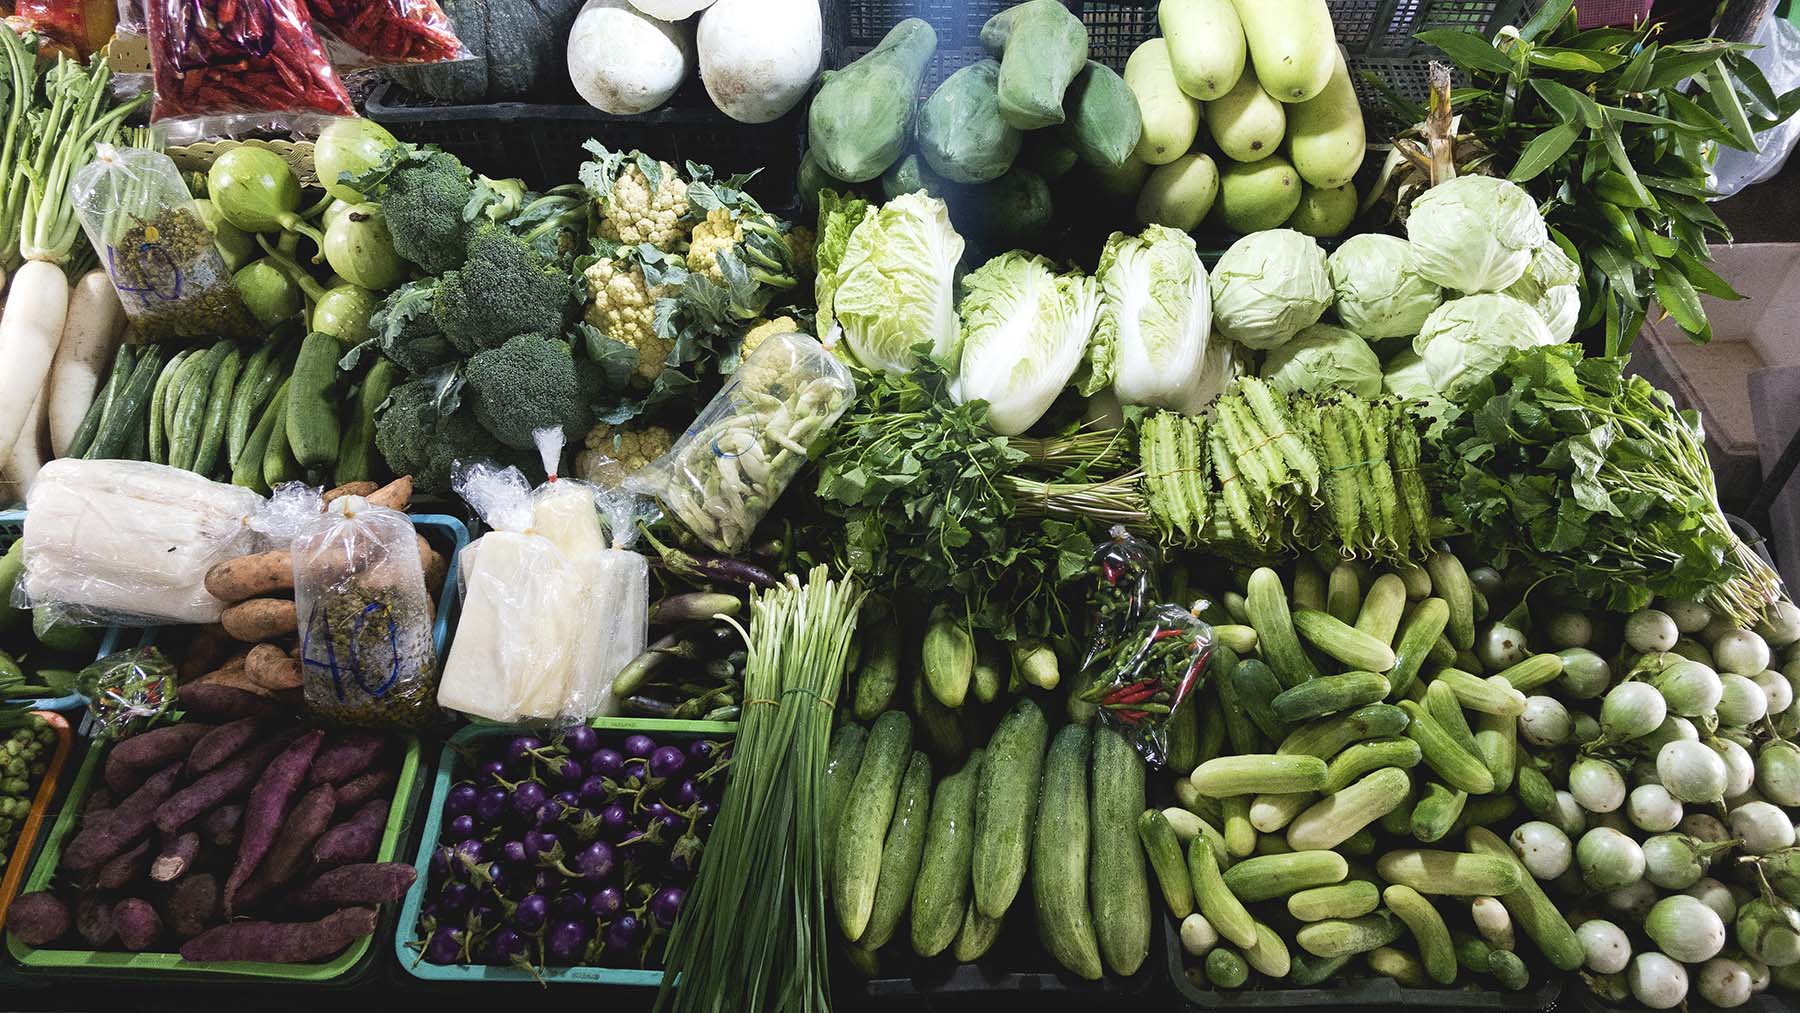 Stock photo of green vegetables at a farmers market stand (Image by RawPixel.com)